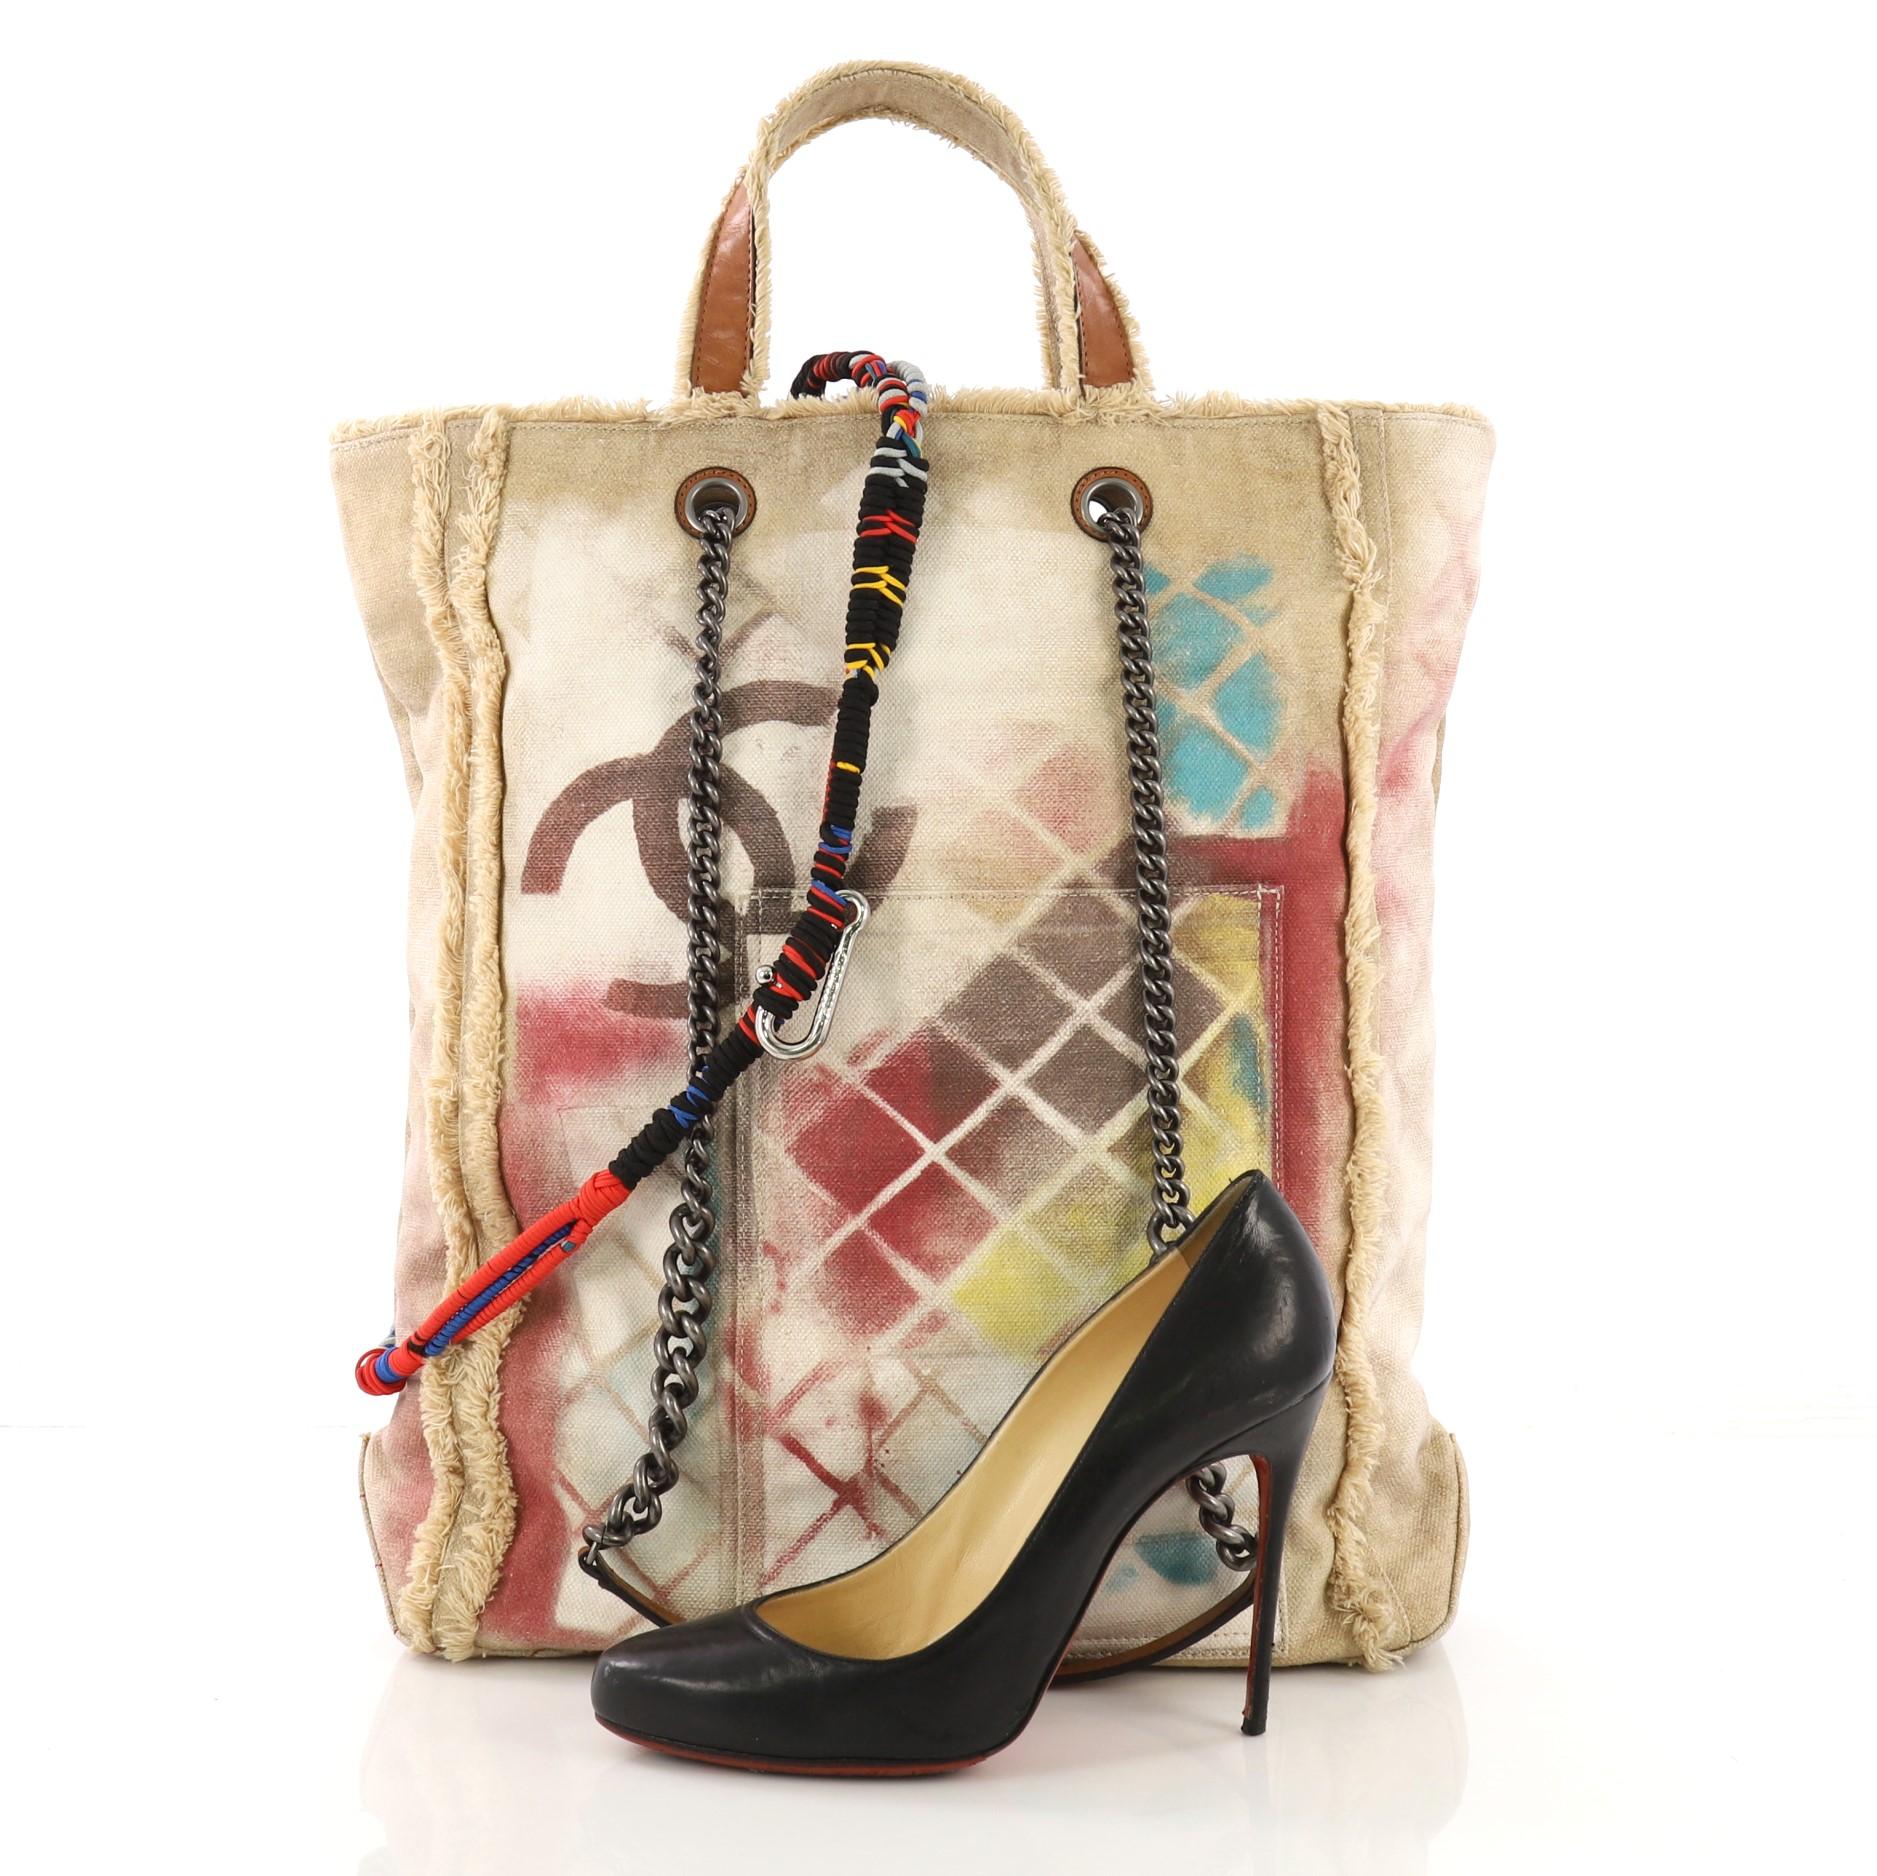 This Chanel Art School Oh My Boy Tote Graffiti Canvas, crafted from beige graffiti printed and sprayed canvas, features dual flat top handles, frayed canvas trim, chain link shoulder straps with leather pads, dangling and multicolored ropes and